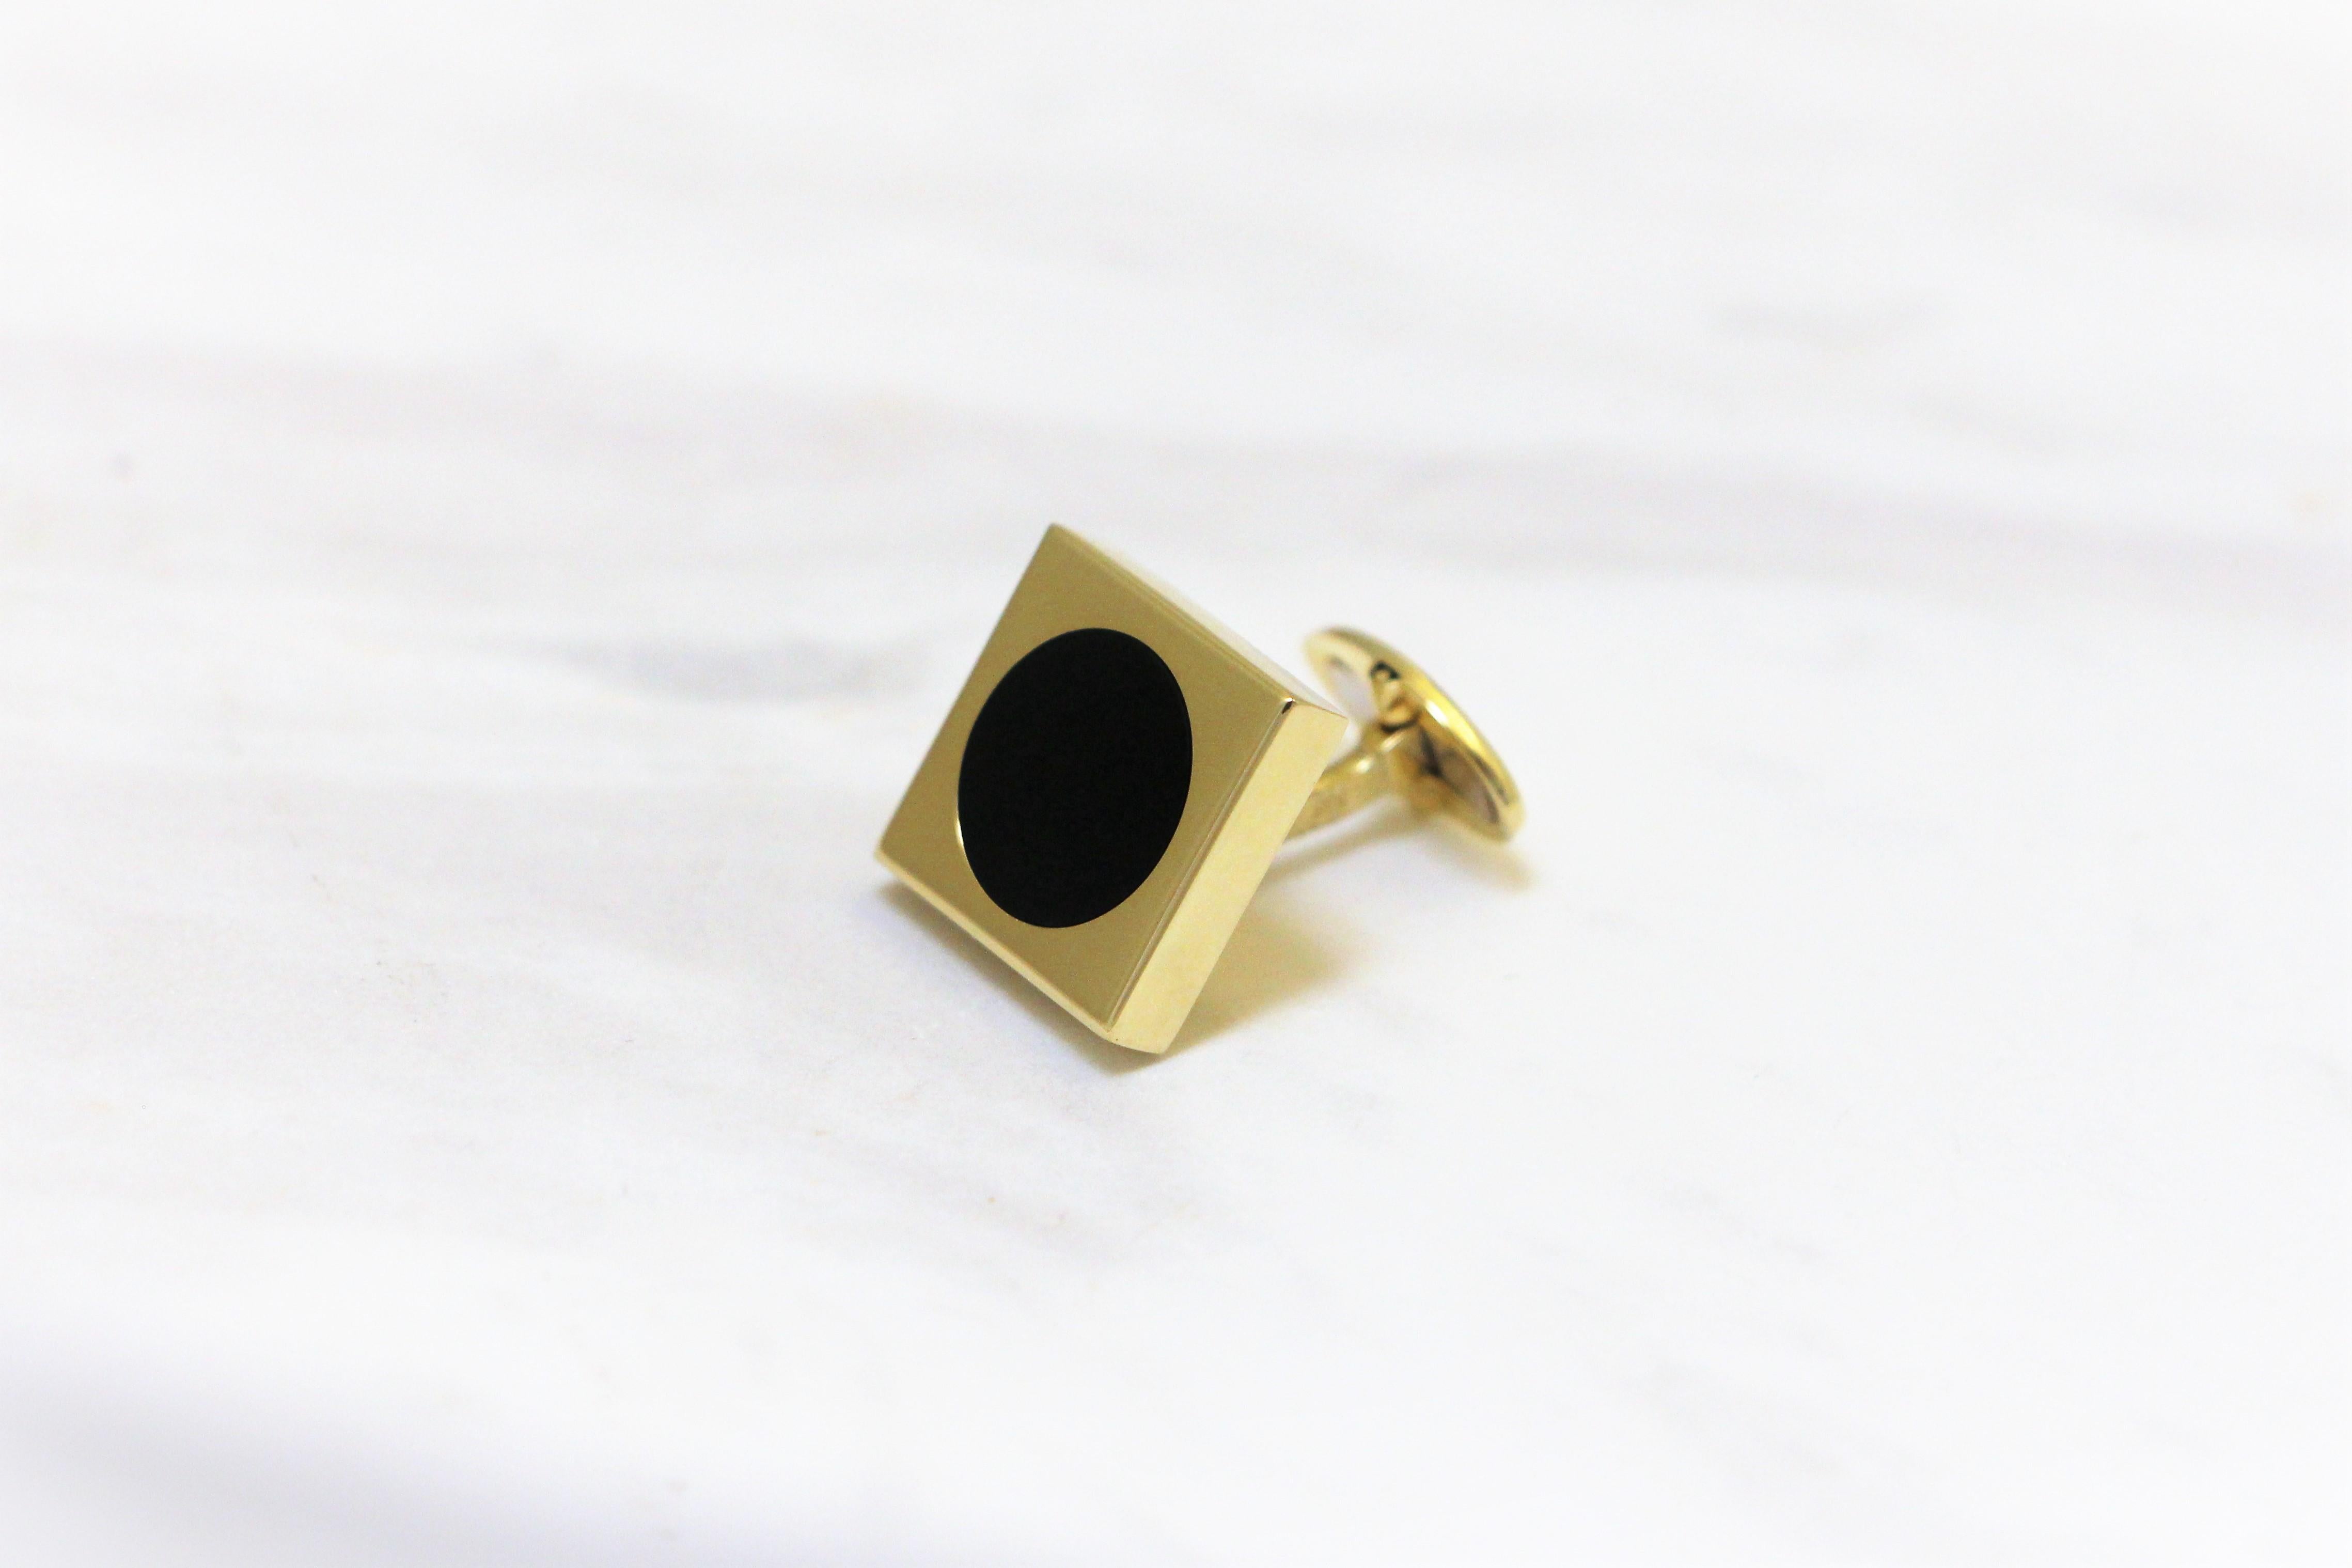 Square Cufflinks handcrafted in 14Kt yellow gold, featuring a round -Circle- black onyx centre.
The gold and the round black onyx together create a contemporary statement of classiness. These Cufflinks belong to Metalloplasies Collection: Fragments